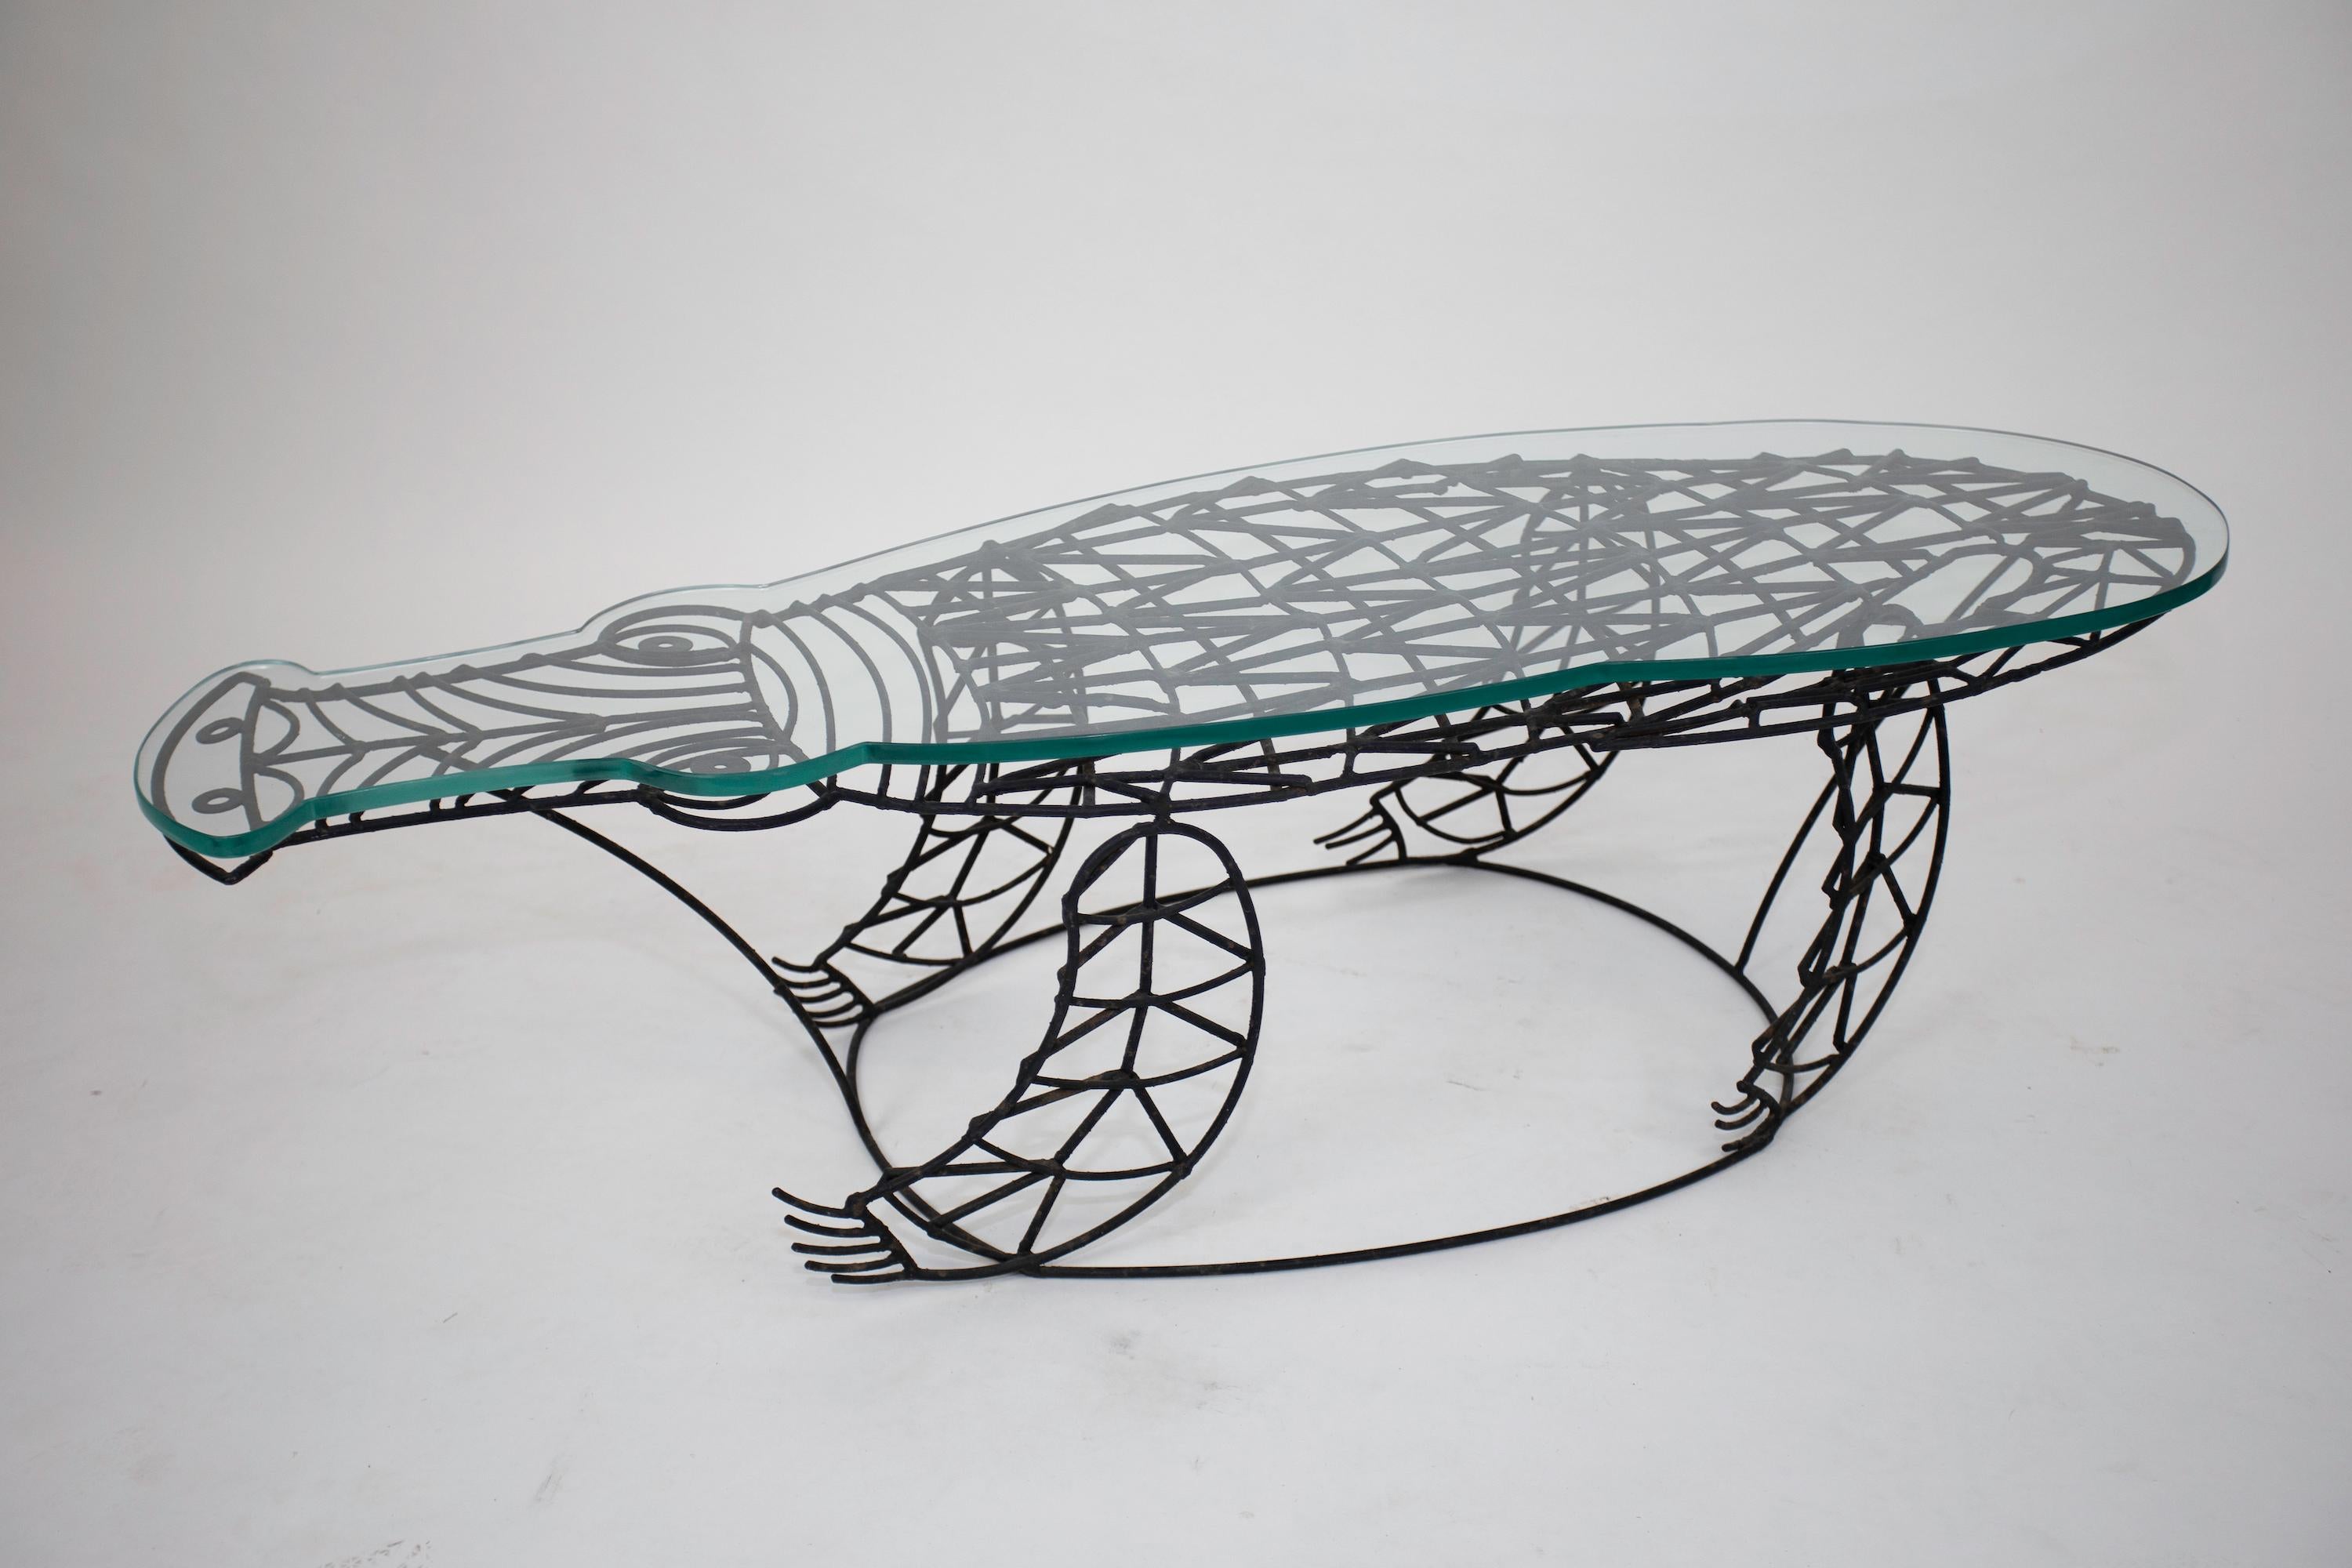 John Risley Alligator Table with conforming Glass Top
Original surface on the wrought Iron.